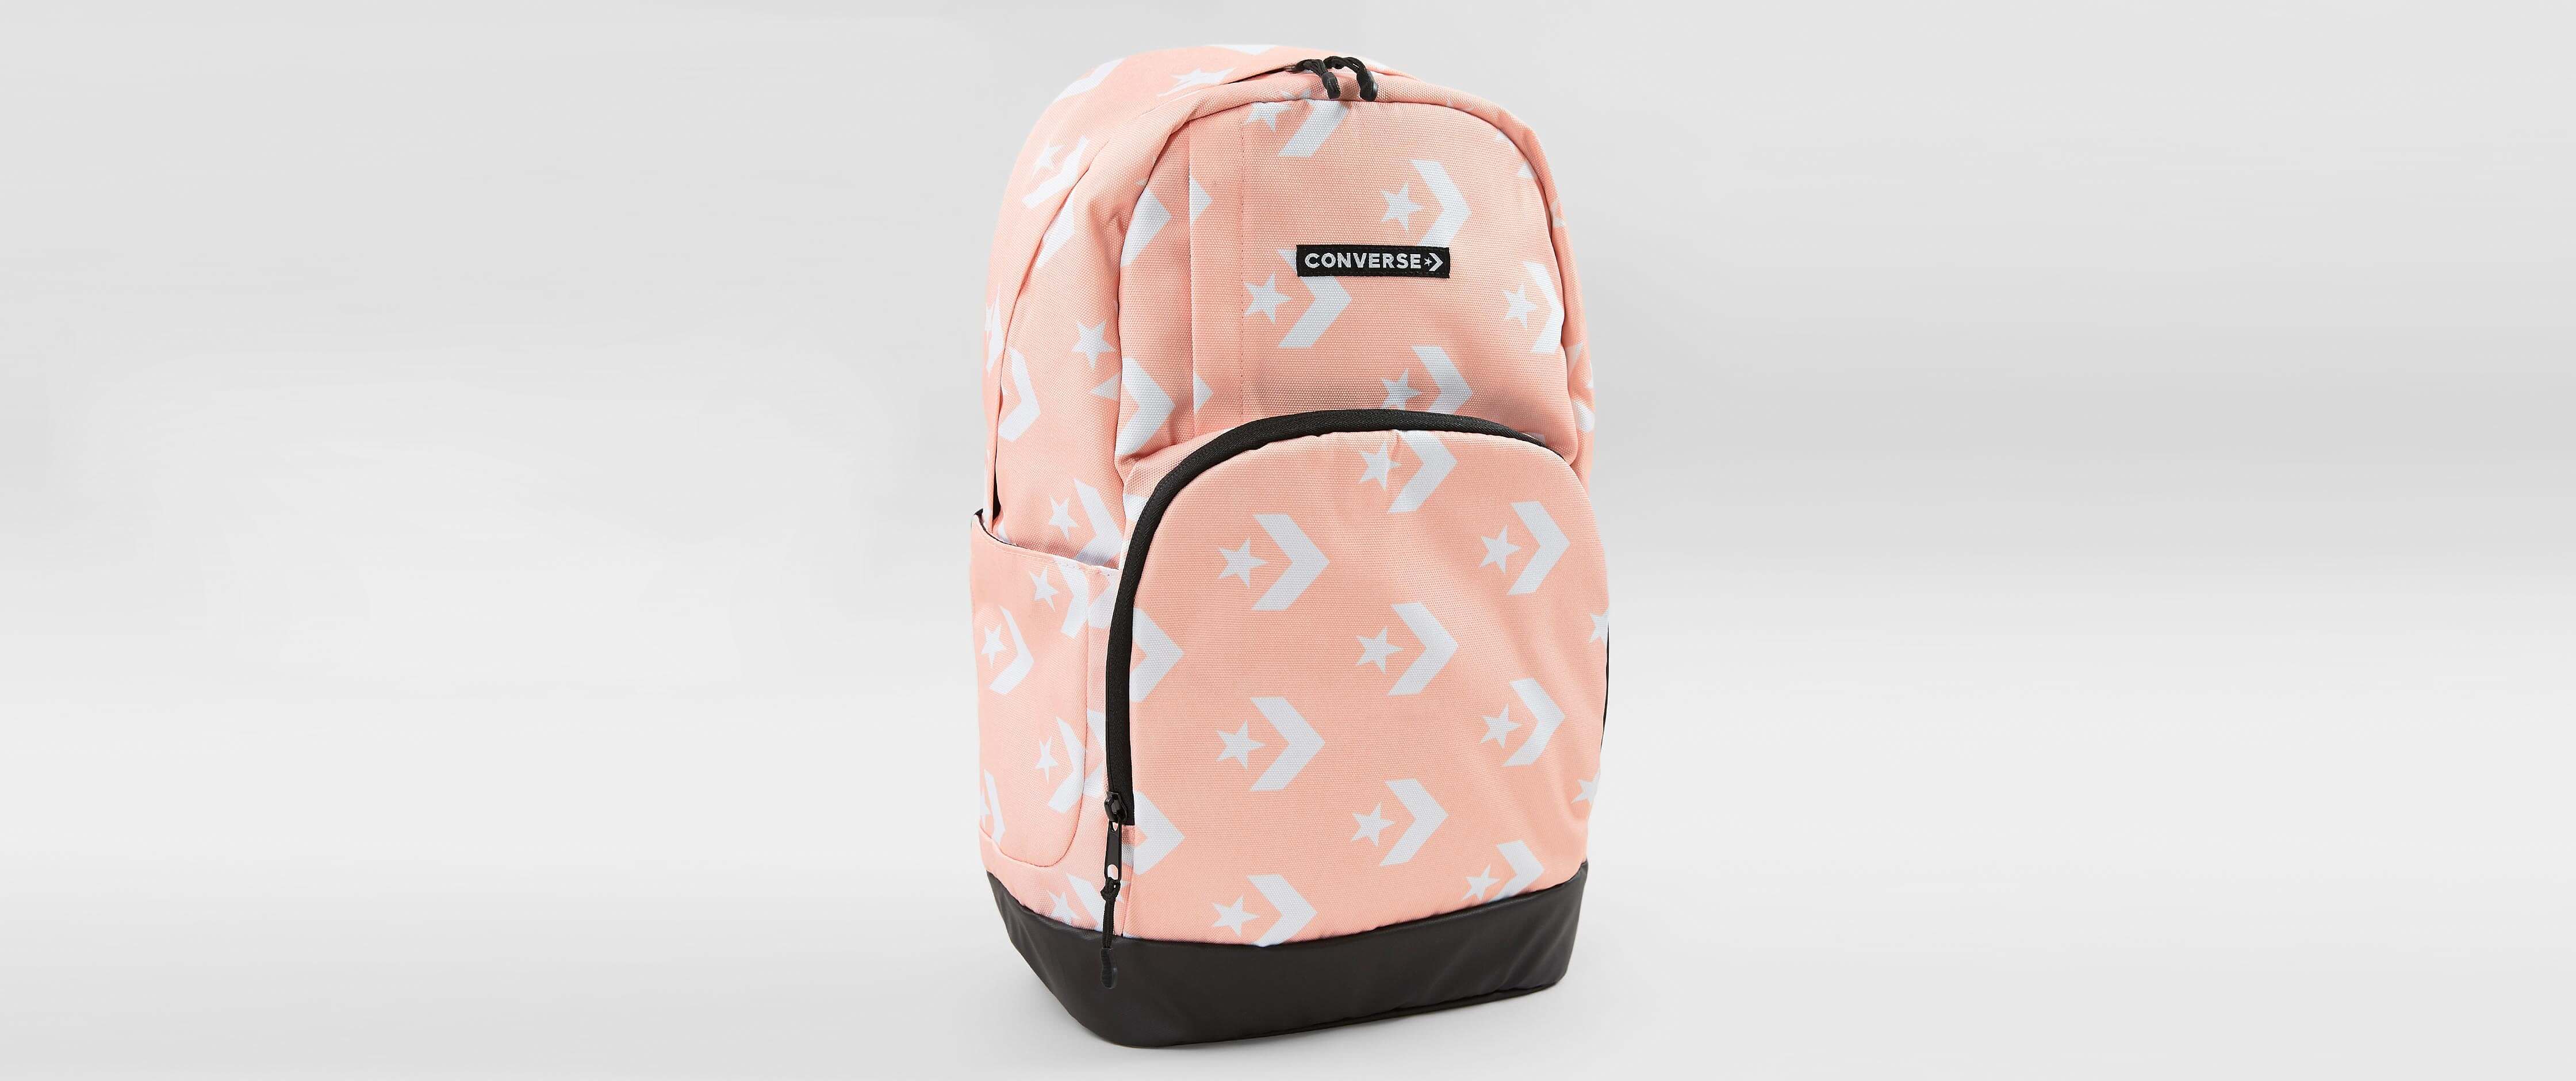 converse school bags for girls